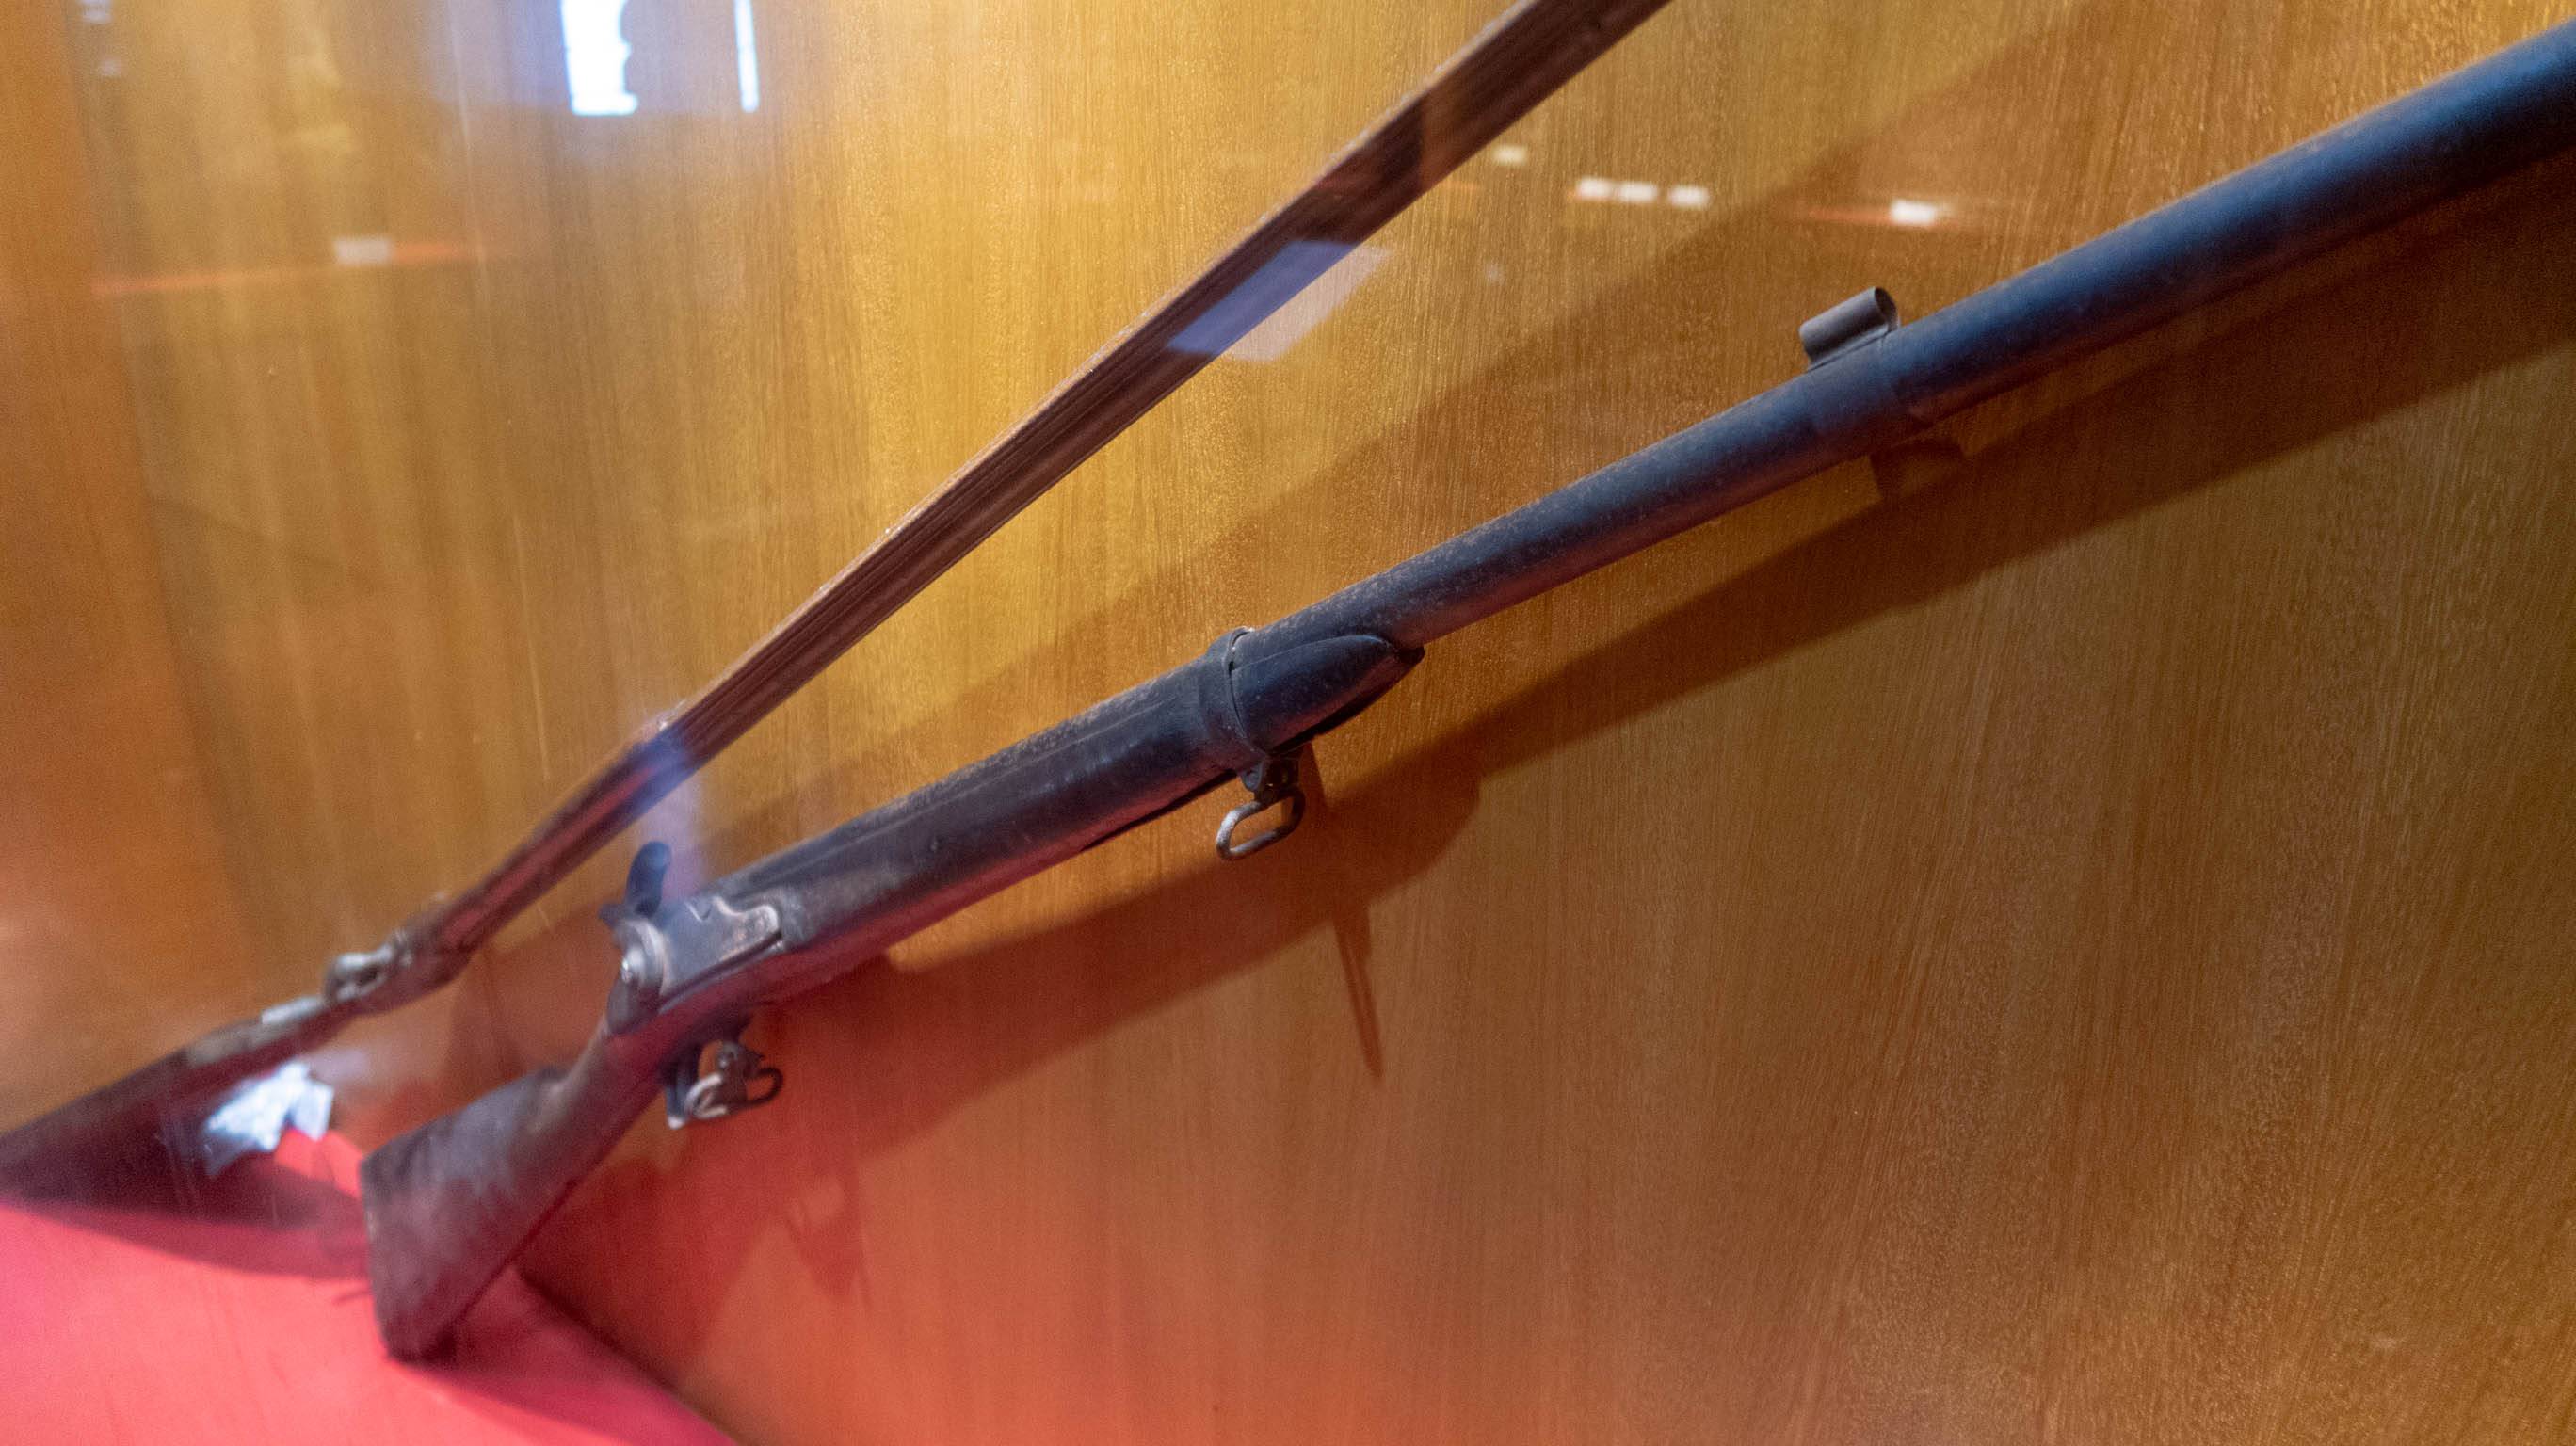 While the Balinese soldier used spears, the Dutch soldiers had these weapons.